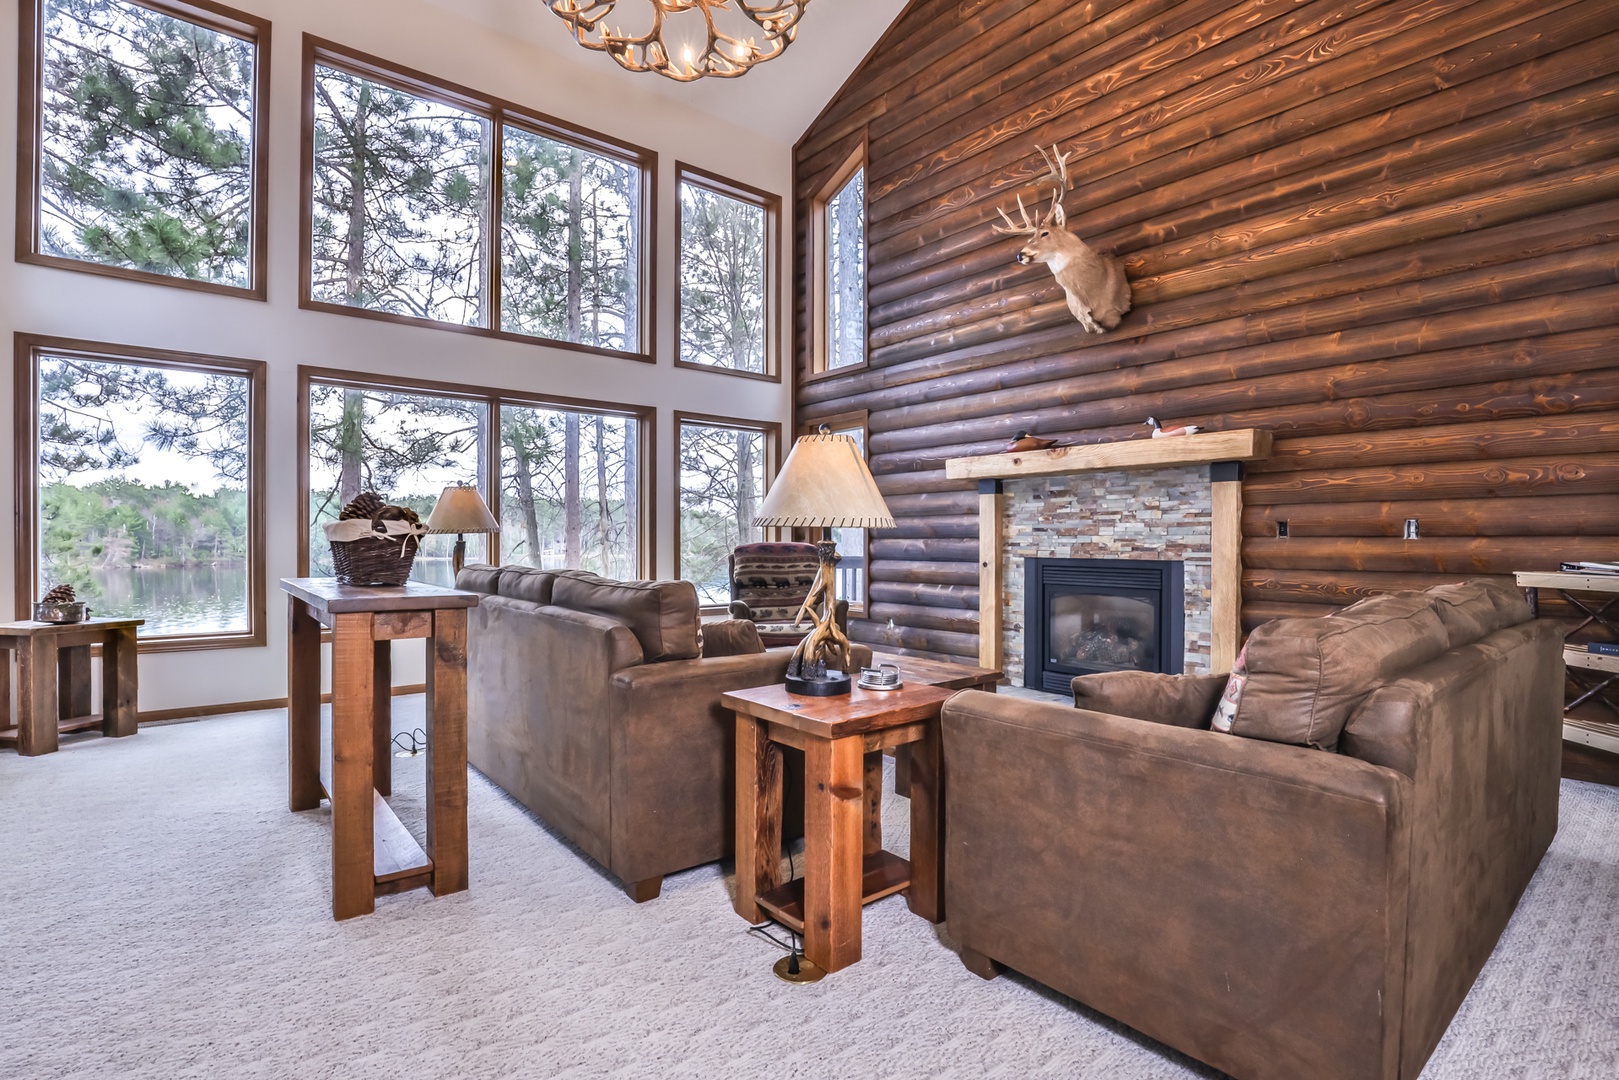 Pickerel Point Executive Home - Hiller Vacation Homes